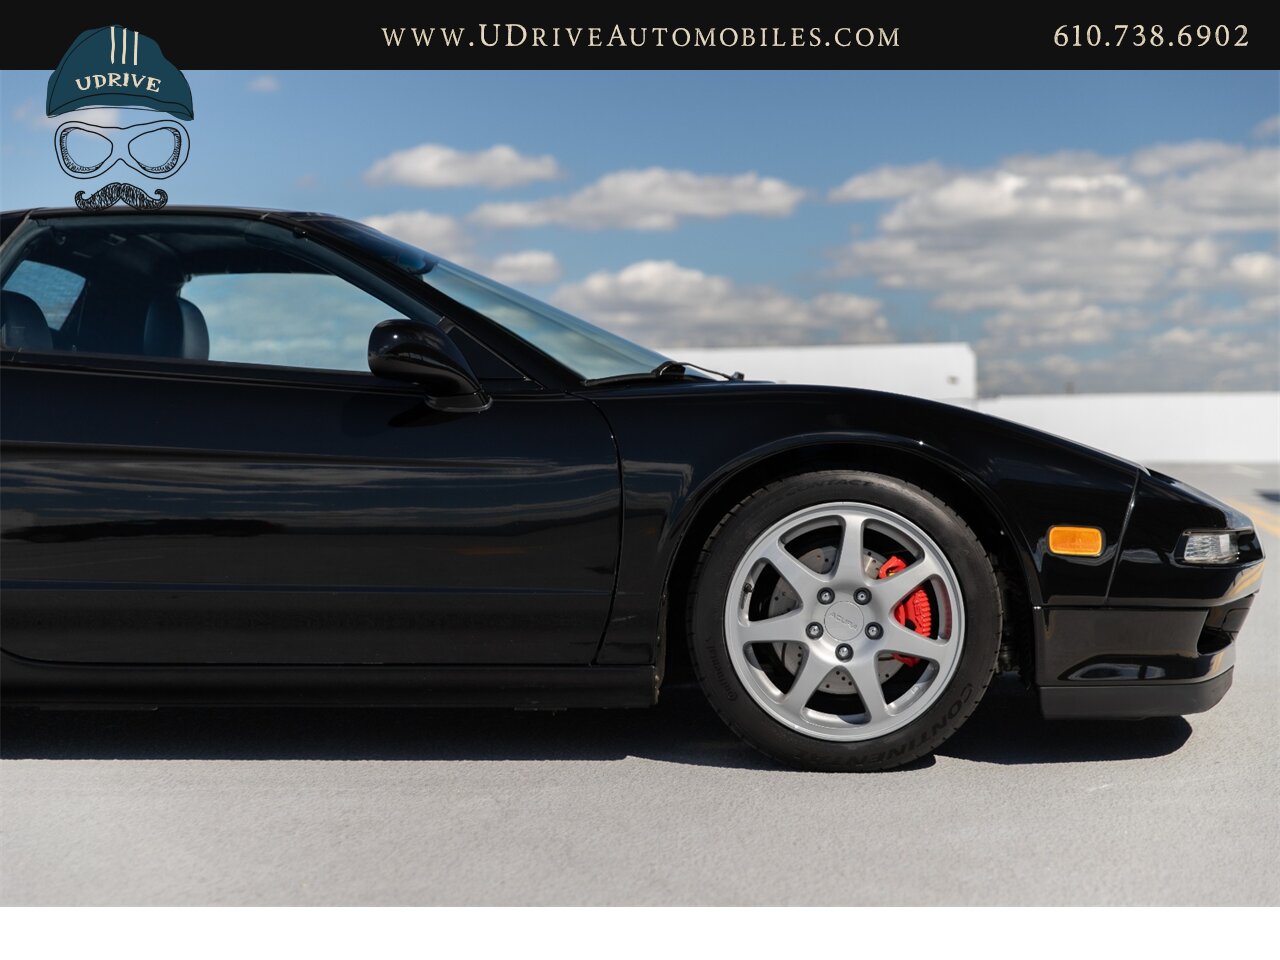 1996 Acura NSX NSX-T  5 Speed Manual Fresh Timing Belt Service - Photo 19 - West Chester, PA 19382